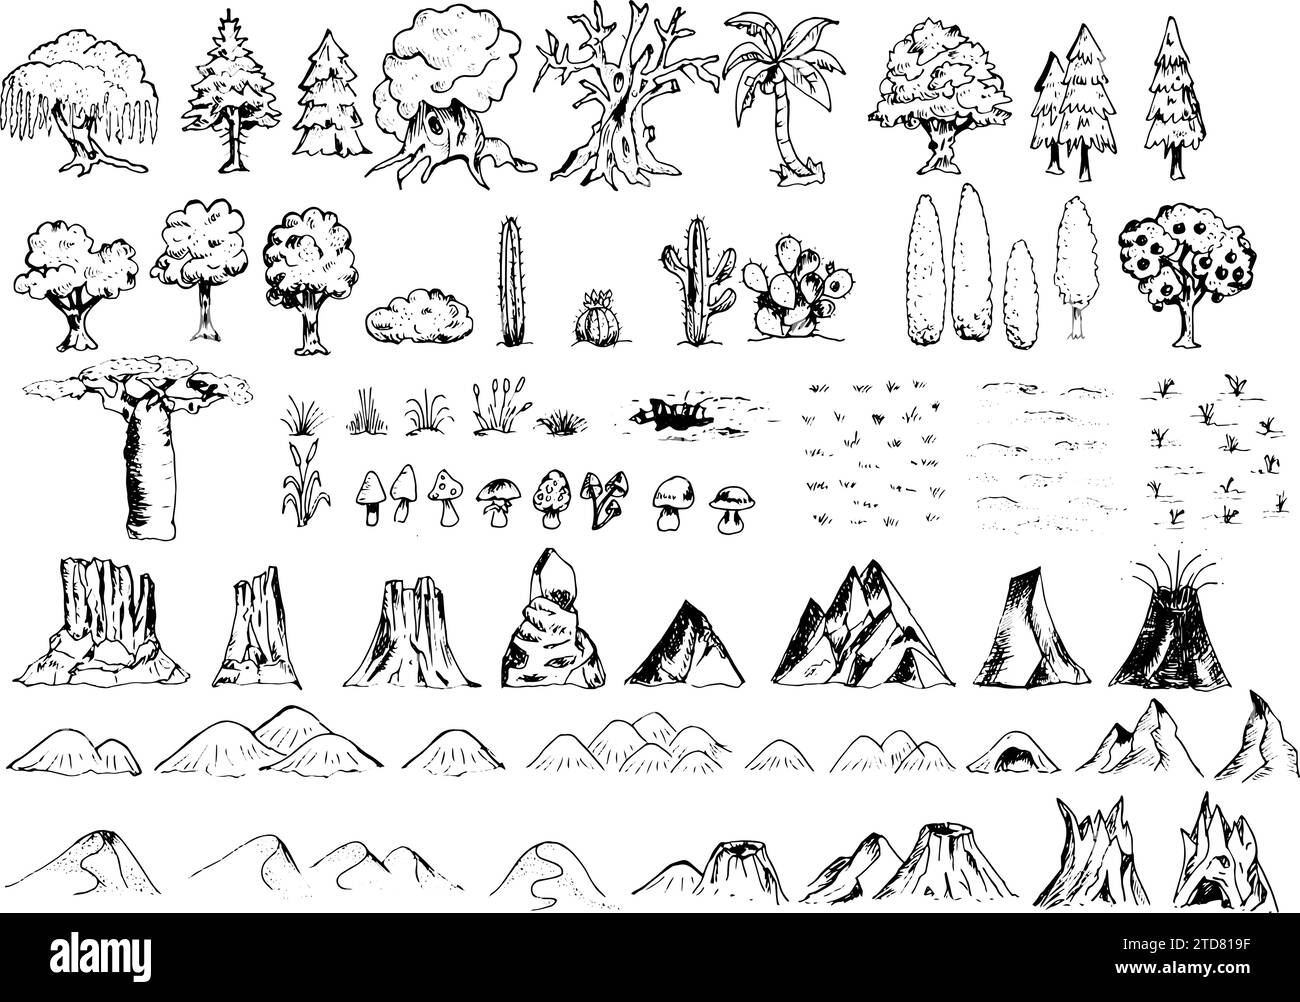 Fantasy map elements with hand drawn nature symbols like trees, mountains, hills, and fields Stock Vector